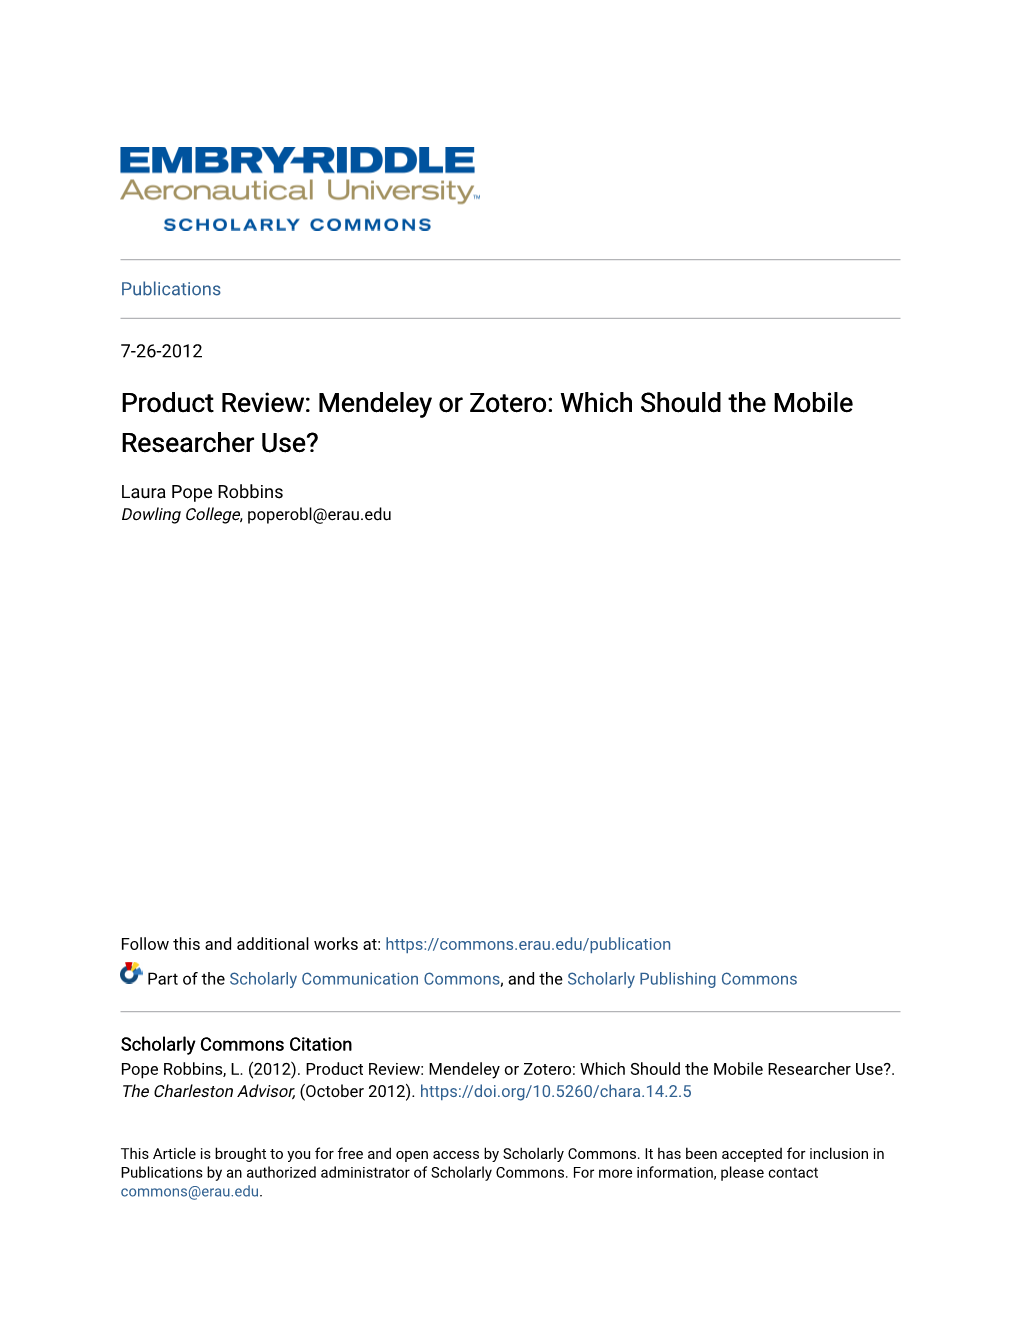 Mendeley Or Zotero: Which Should the Mobile Researcher Use?